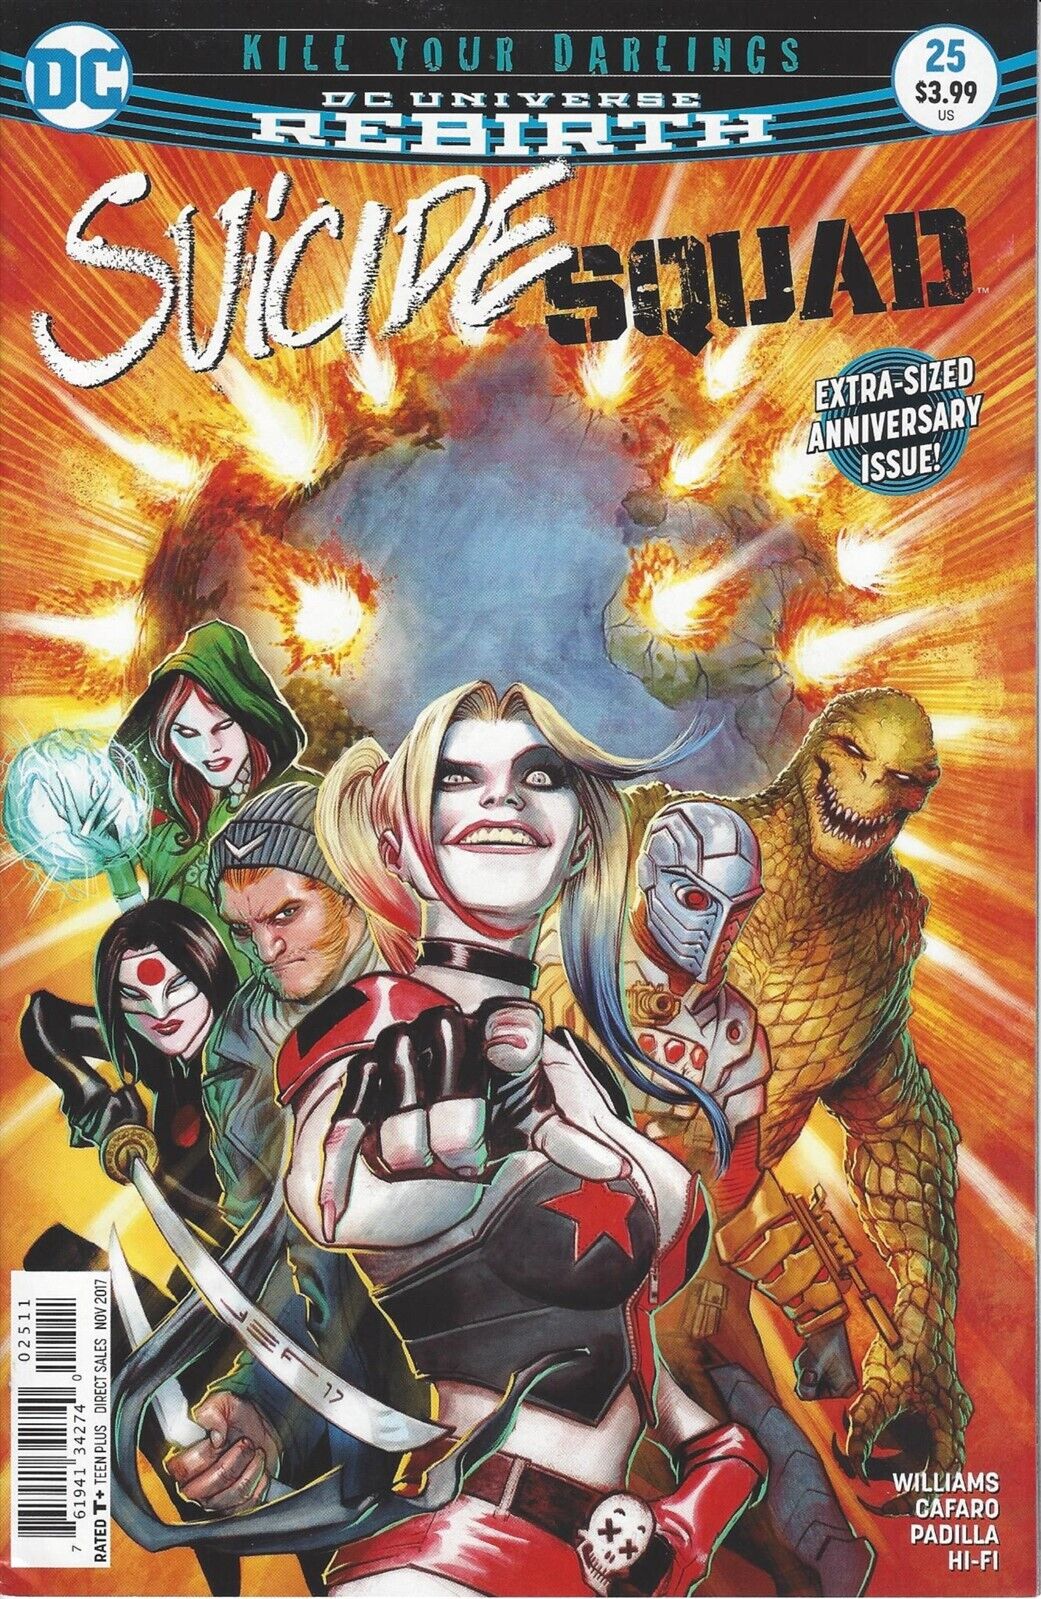 Suicide Squad #25A Kill Your Darlings Conclusion: Death Over Slavery